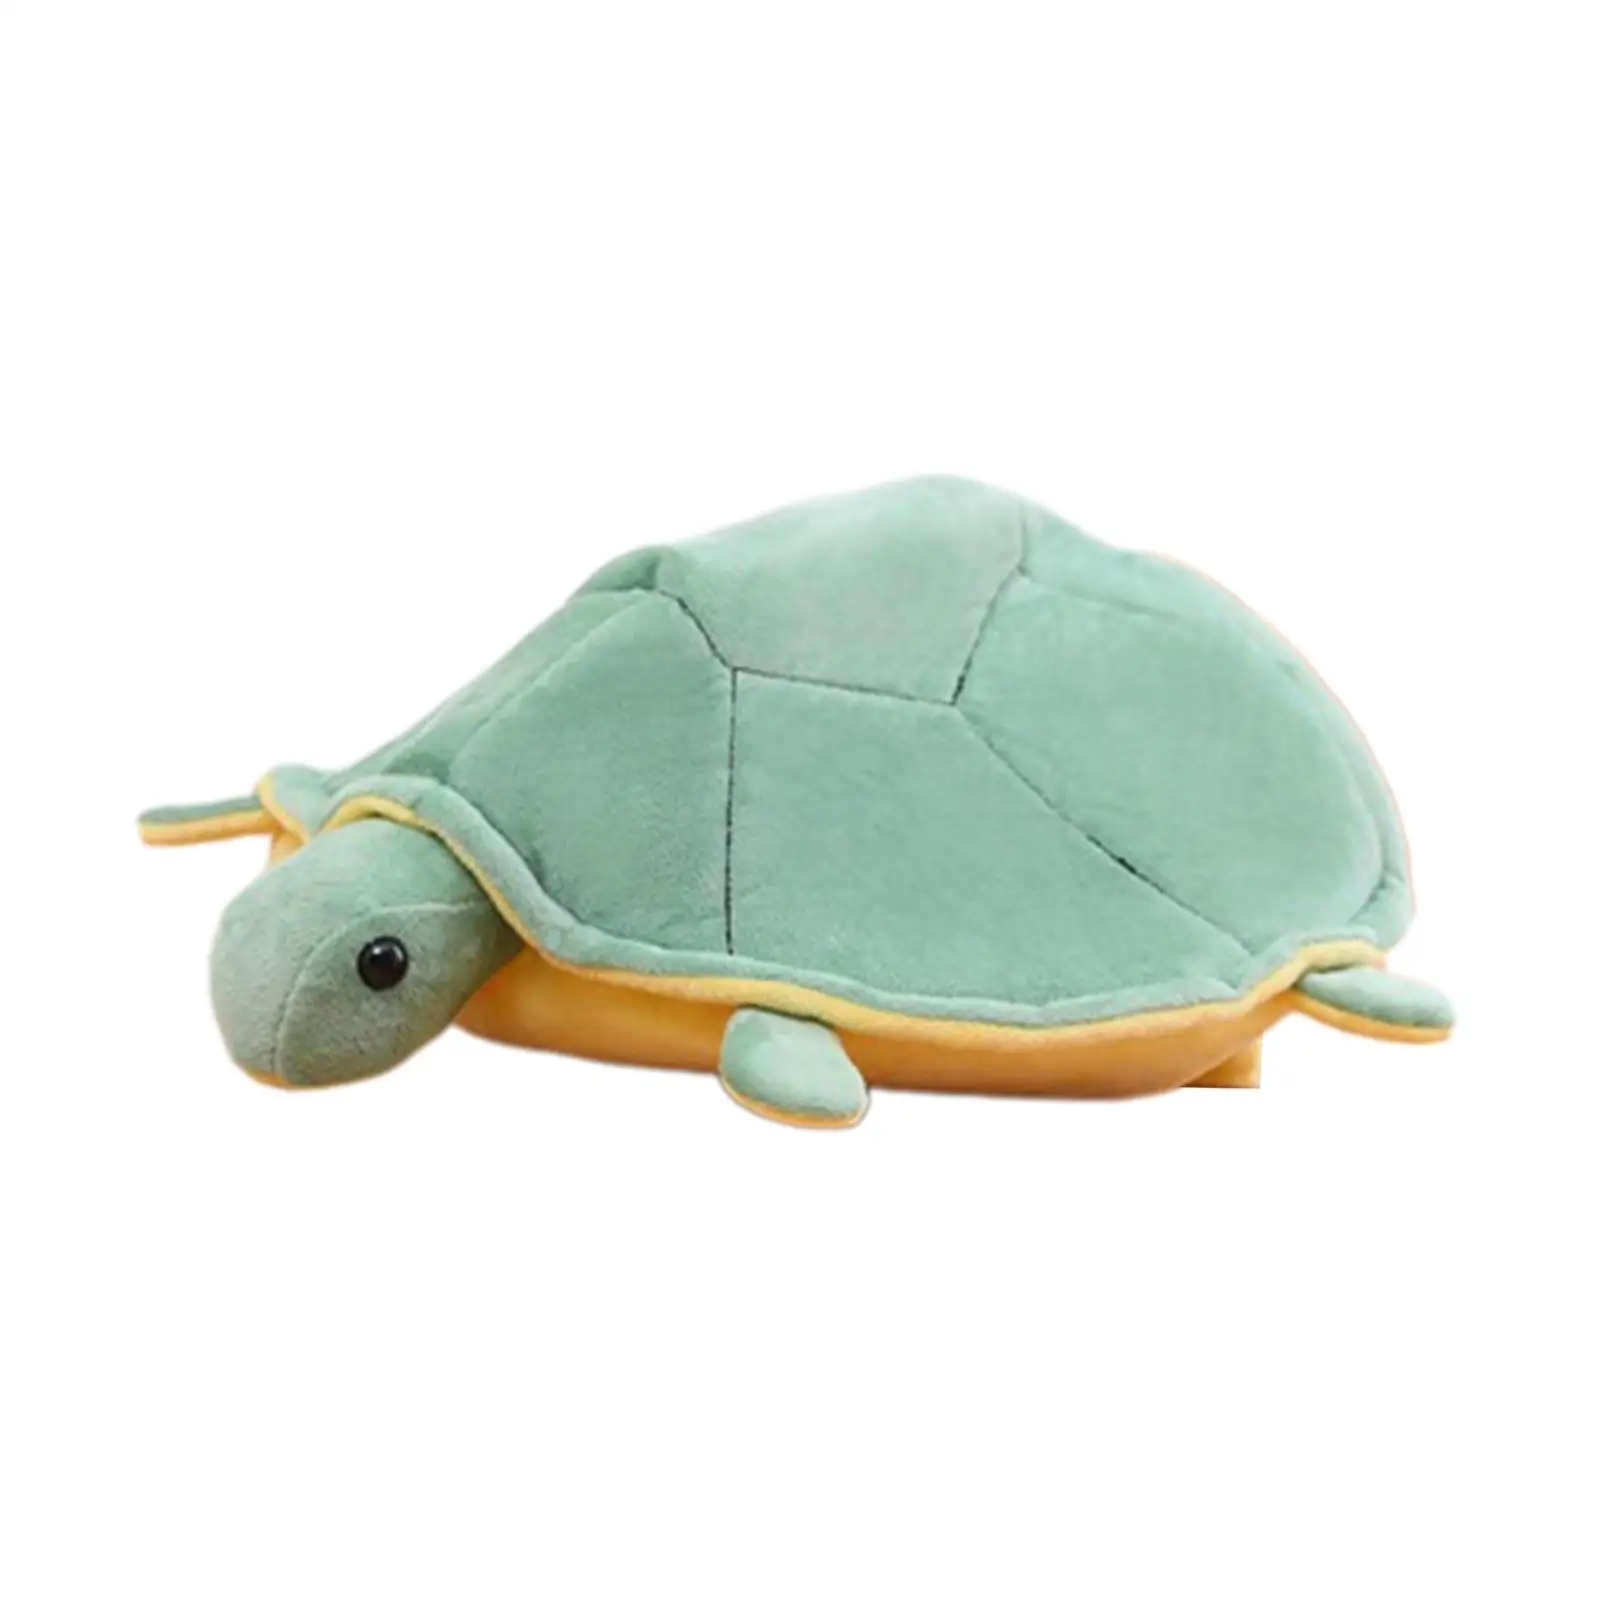 Funny Turtle Plush Hat Cosplay Costume Headgear Adorable for Festival Prom